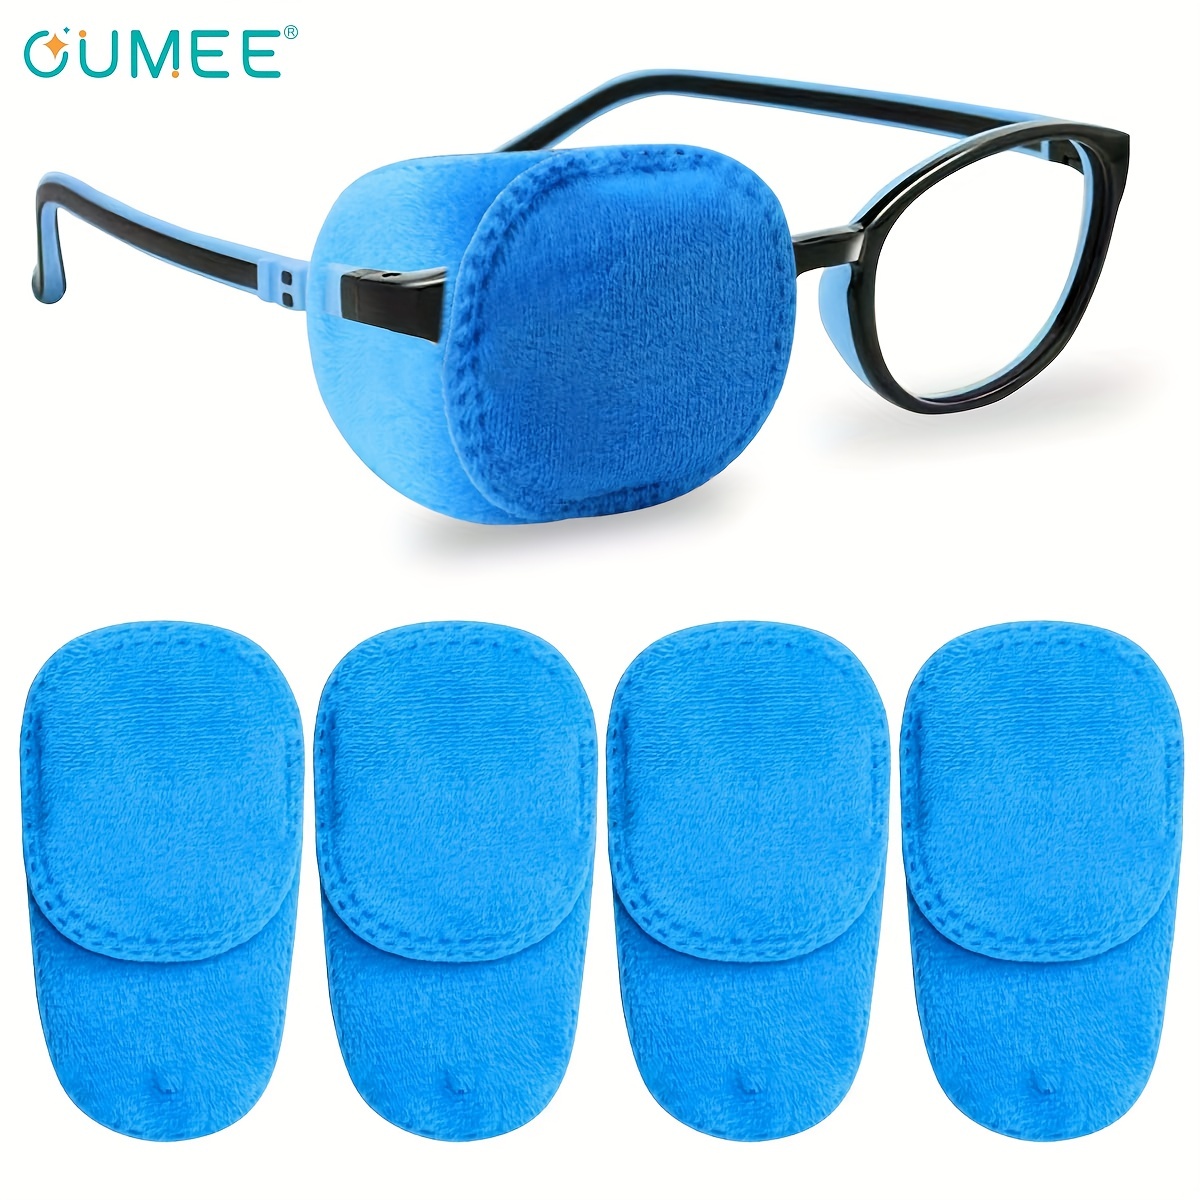 

4 Pack Universal Fit Eye Patches, Right & Left Eye Patch For Glasses, Lazy Eye Patch Treating Lazy Eye Amblyopia Strabismus And After Surgery